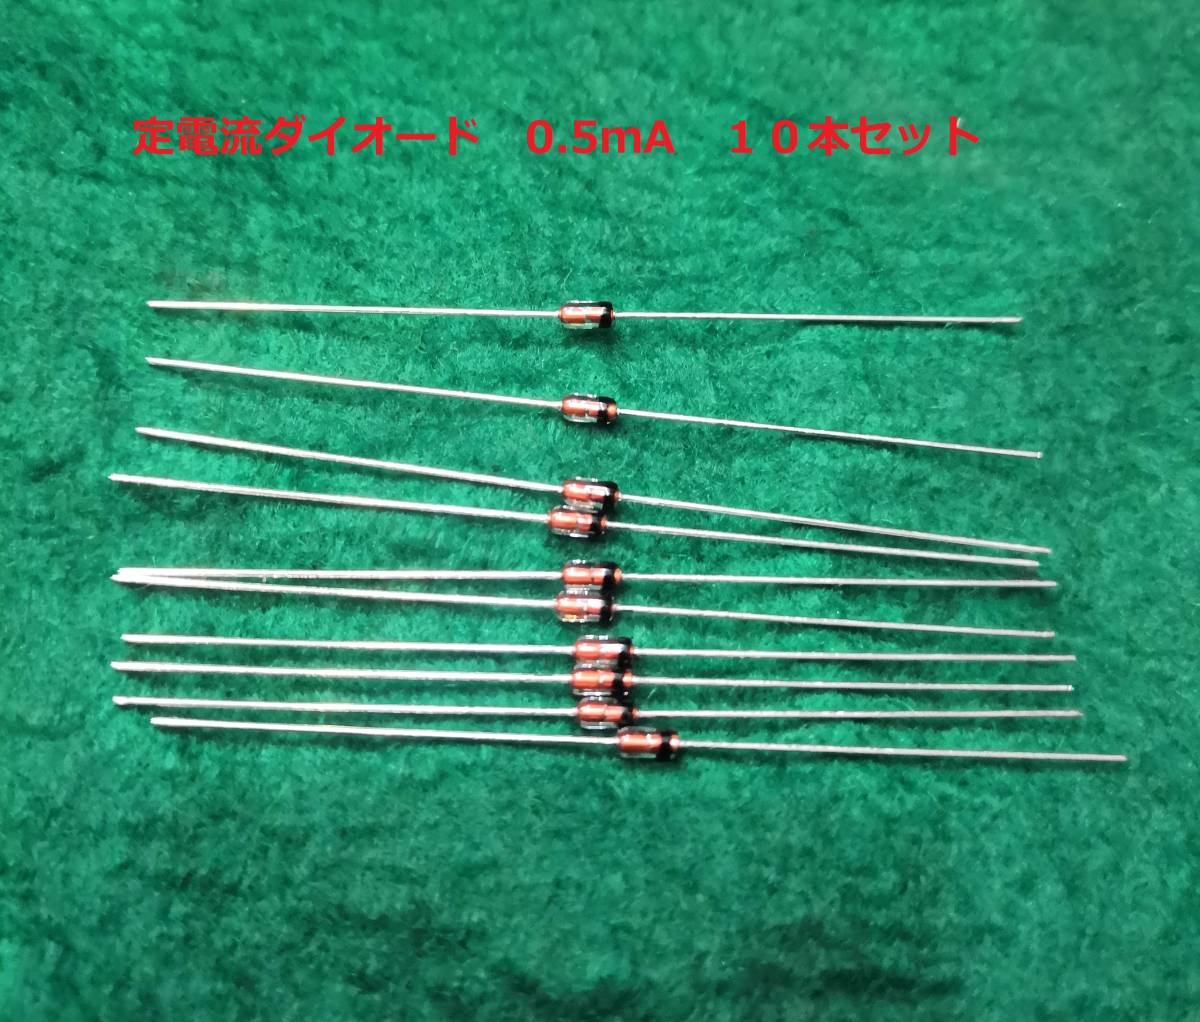  postage 63 jpy . electric current diode (CRD)E-501 0.5mA 10ps.@ stone . electron made postage nationwide equal ordinary mai 63 jpy 